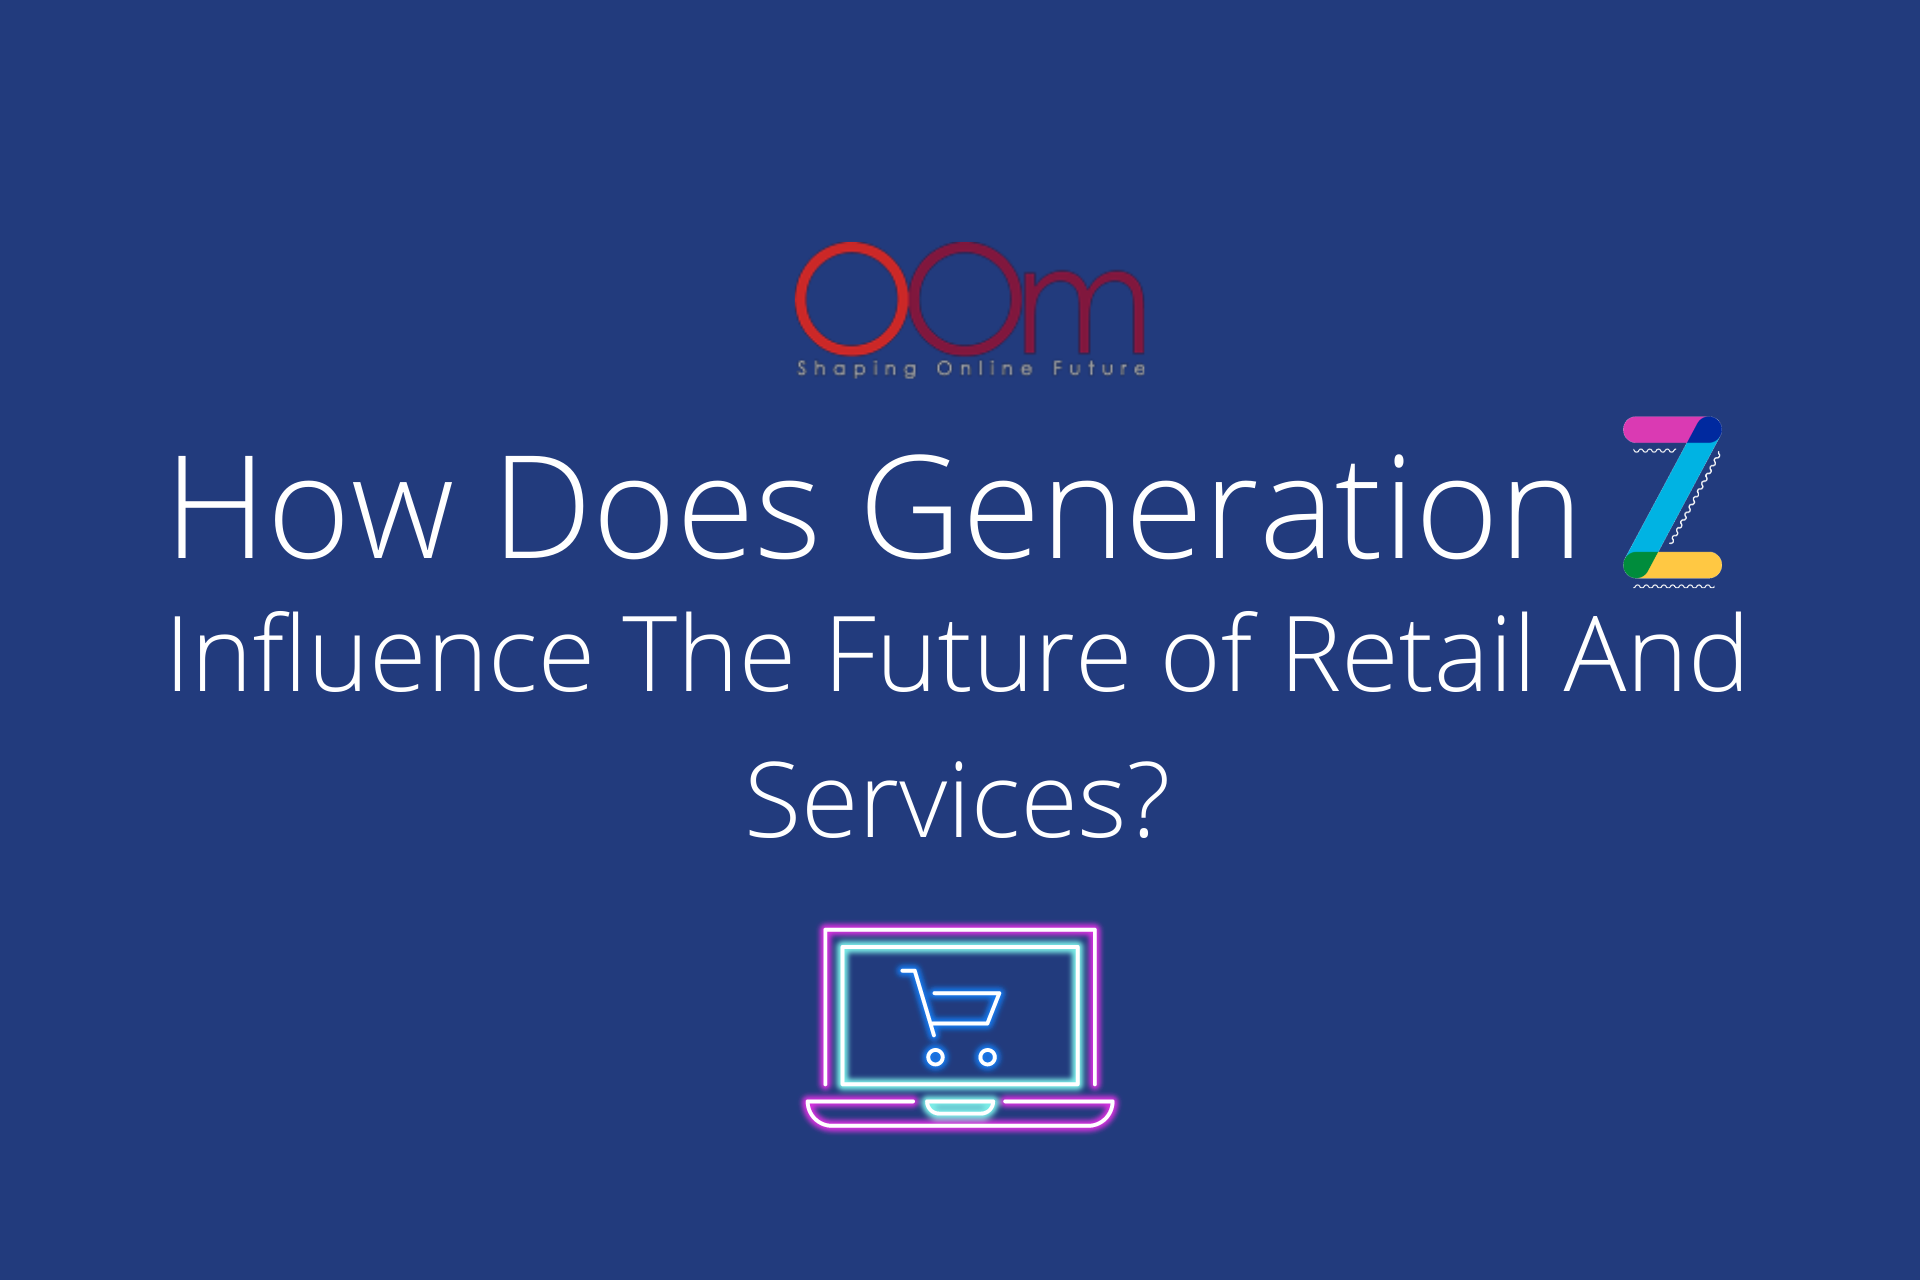 How Does Generation Z Influence The Future of Retail And Services